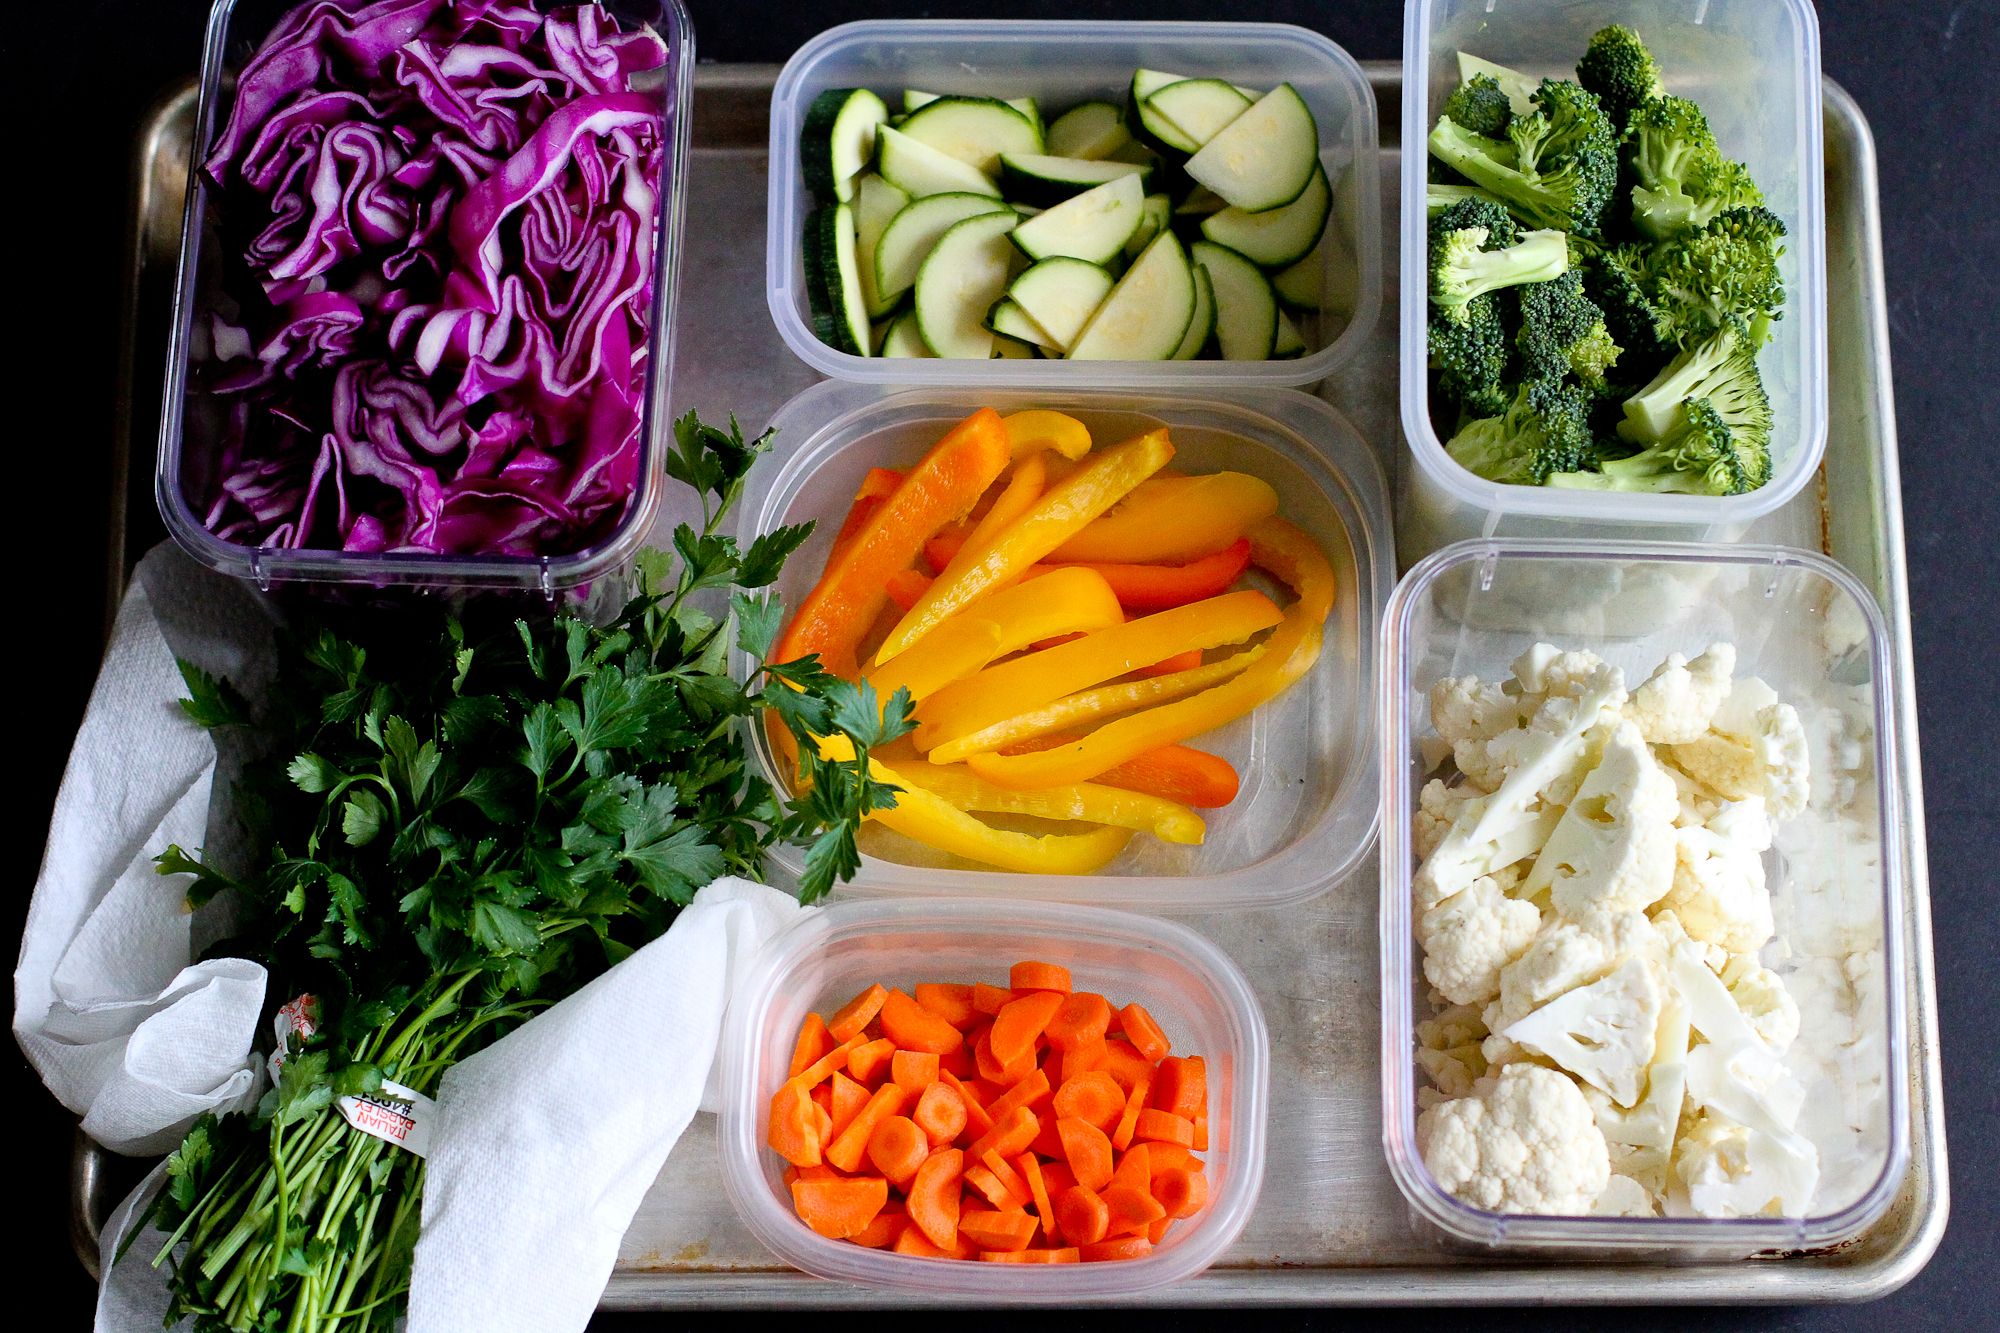 Reasons to Avoid Pre-Cut Vegetables and Fruits